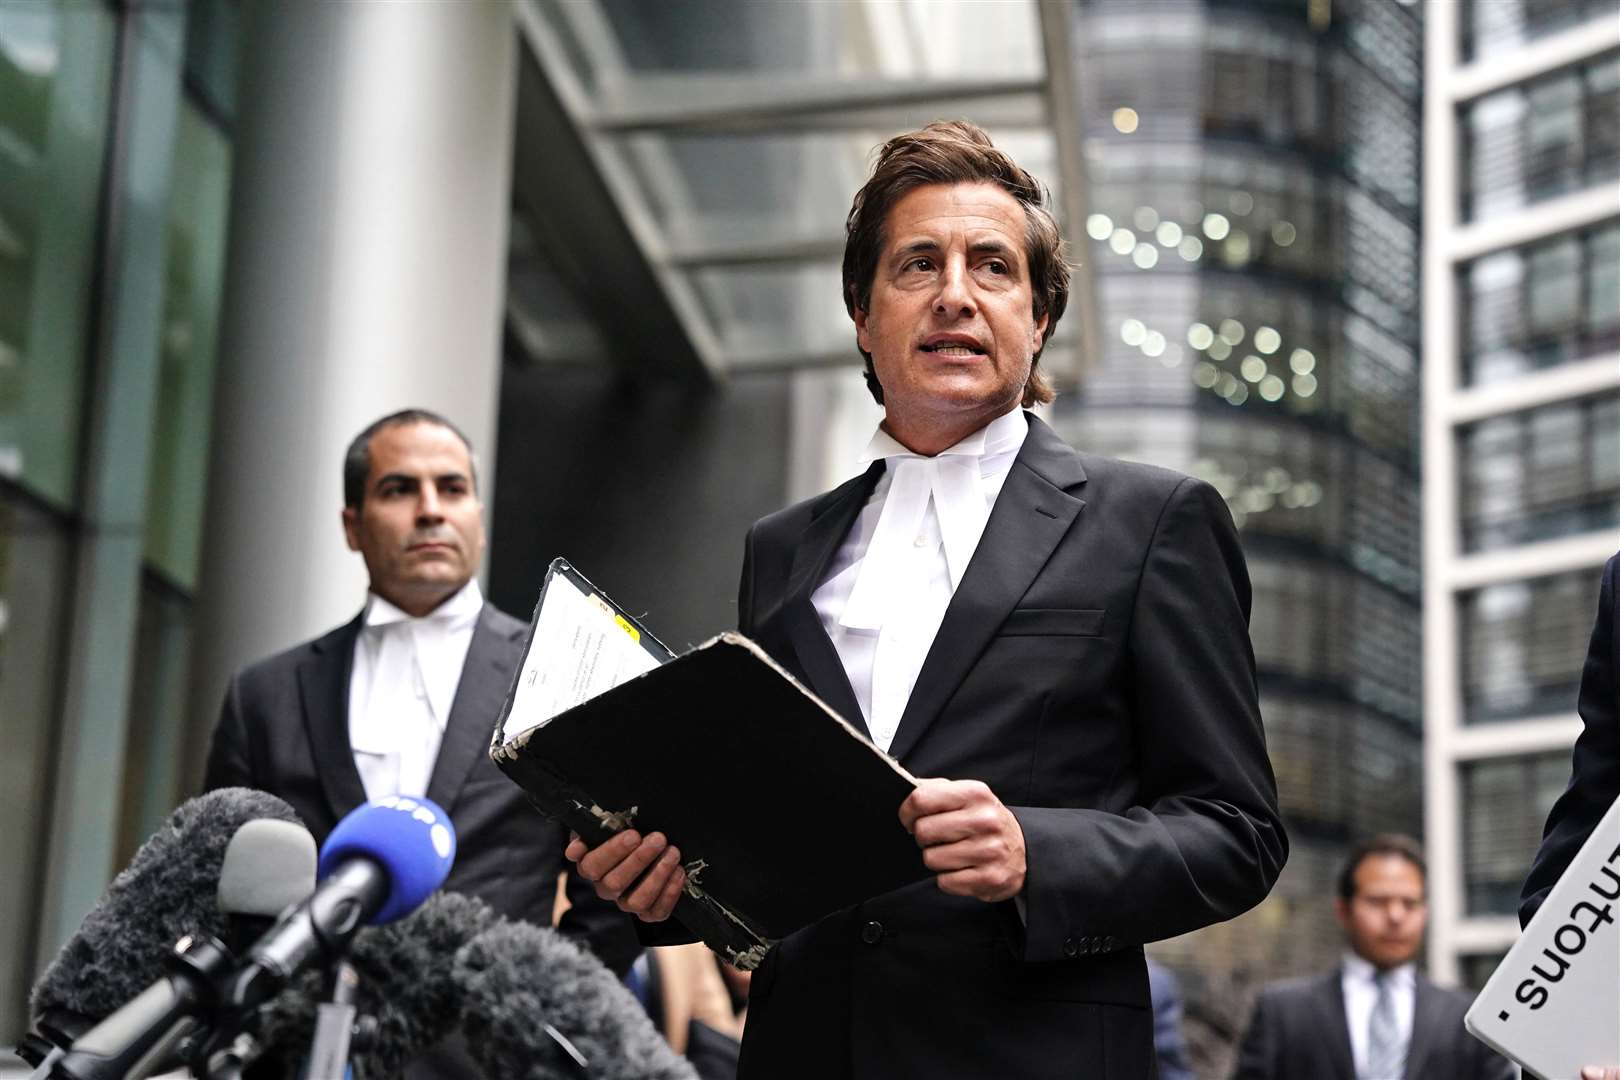 Barrister David Sherborne read a statement on behalf of the Duke of Sussex outside the High Court in London after the ruling (Jordan Pettitt/PA)